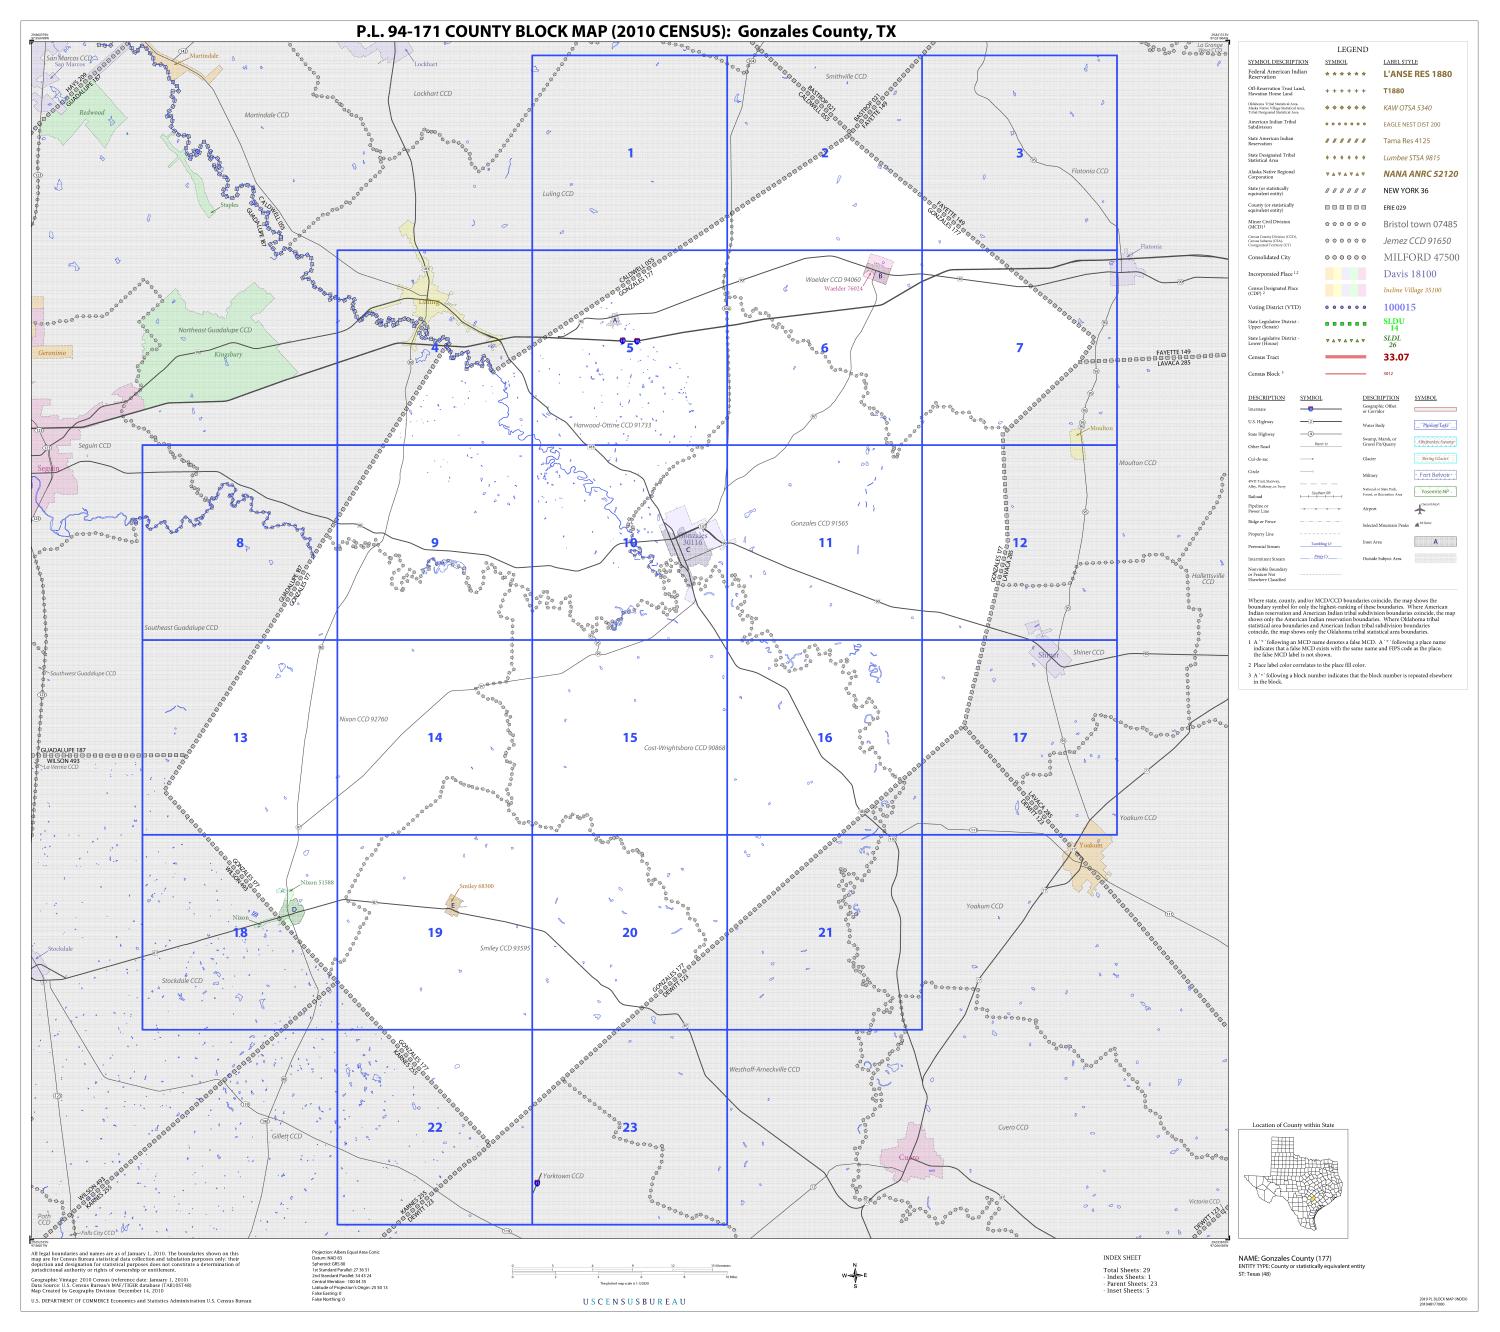 P.L. 94-171 County Block Map (2010 Census): Gonzales County, Index
                                                
                                                    [Sequence #]: 1 of 1
                                                